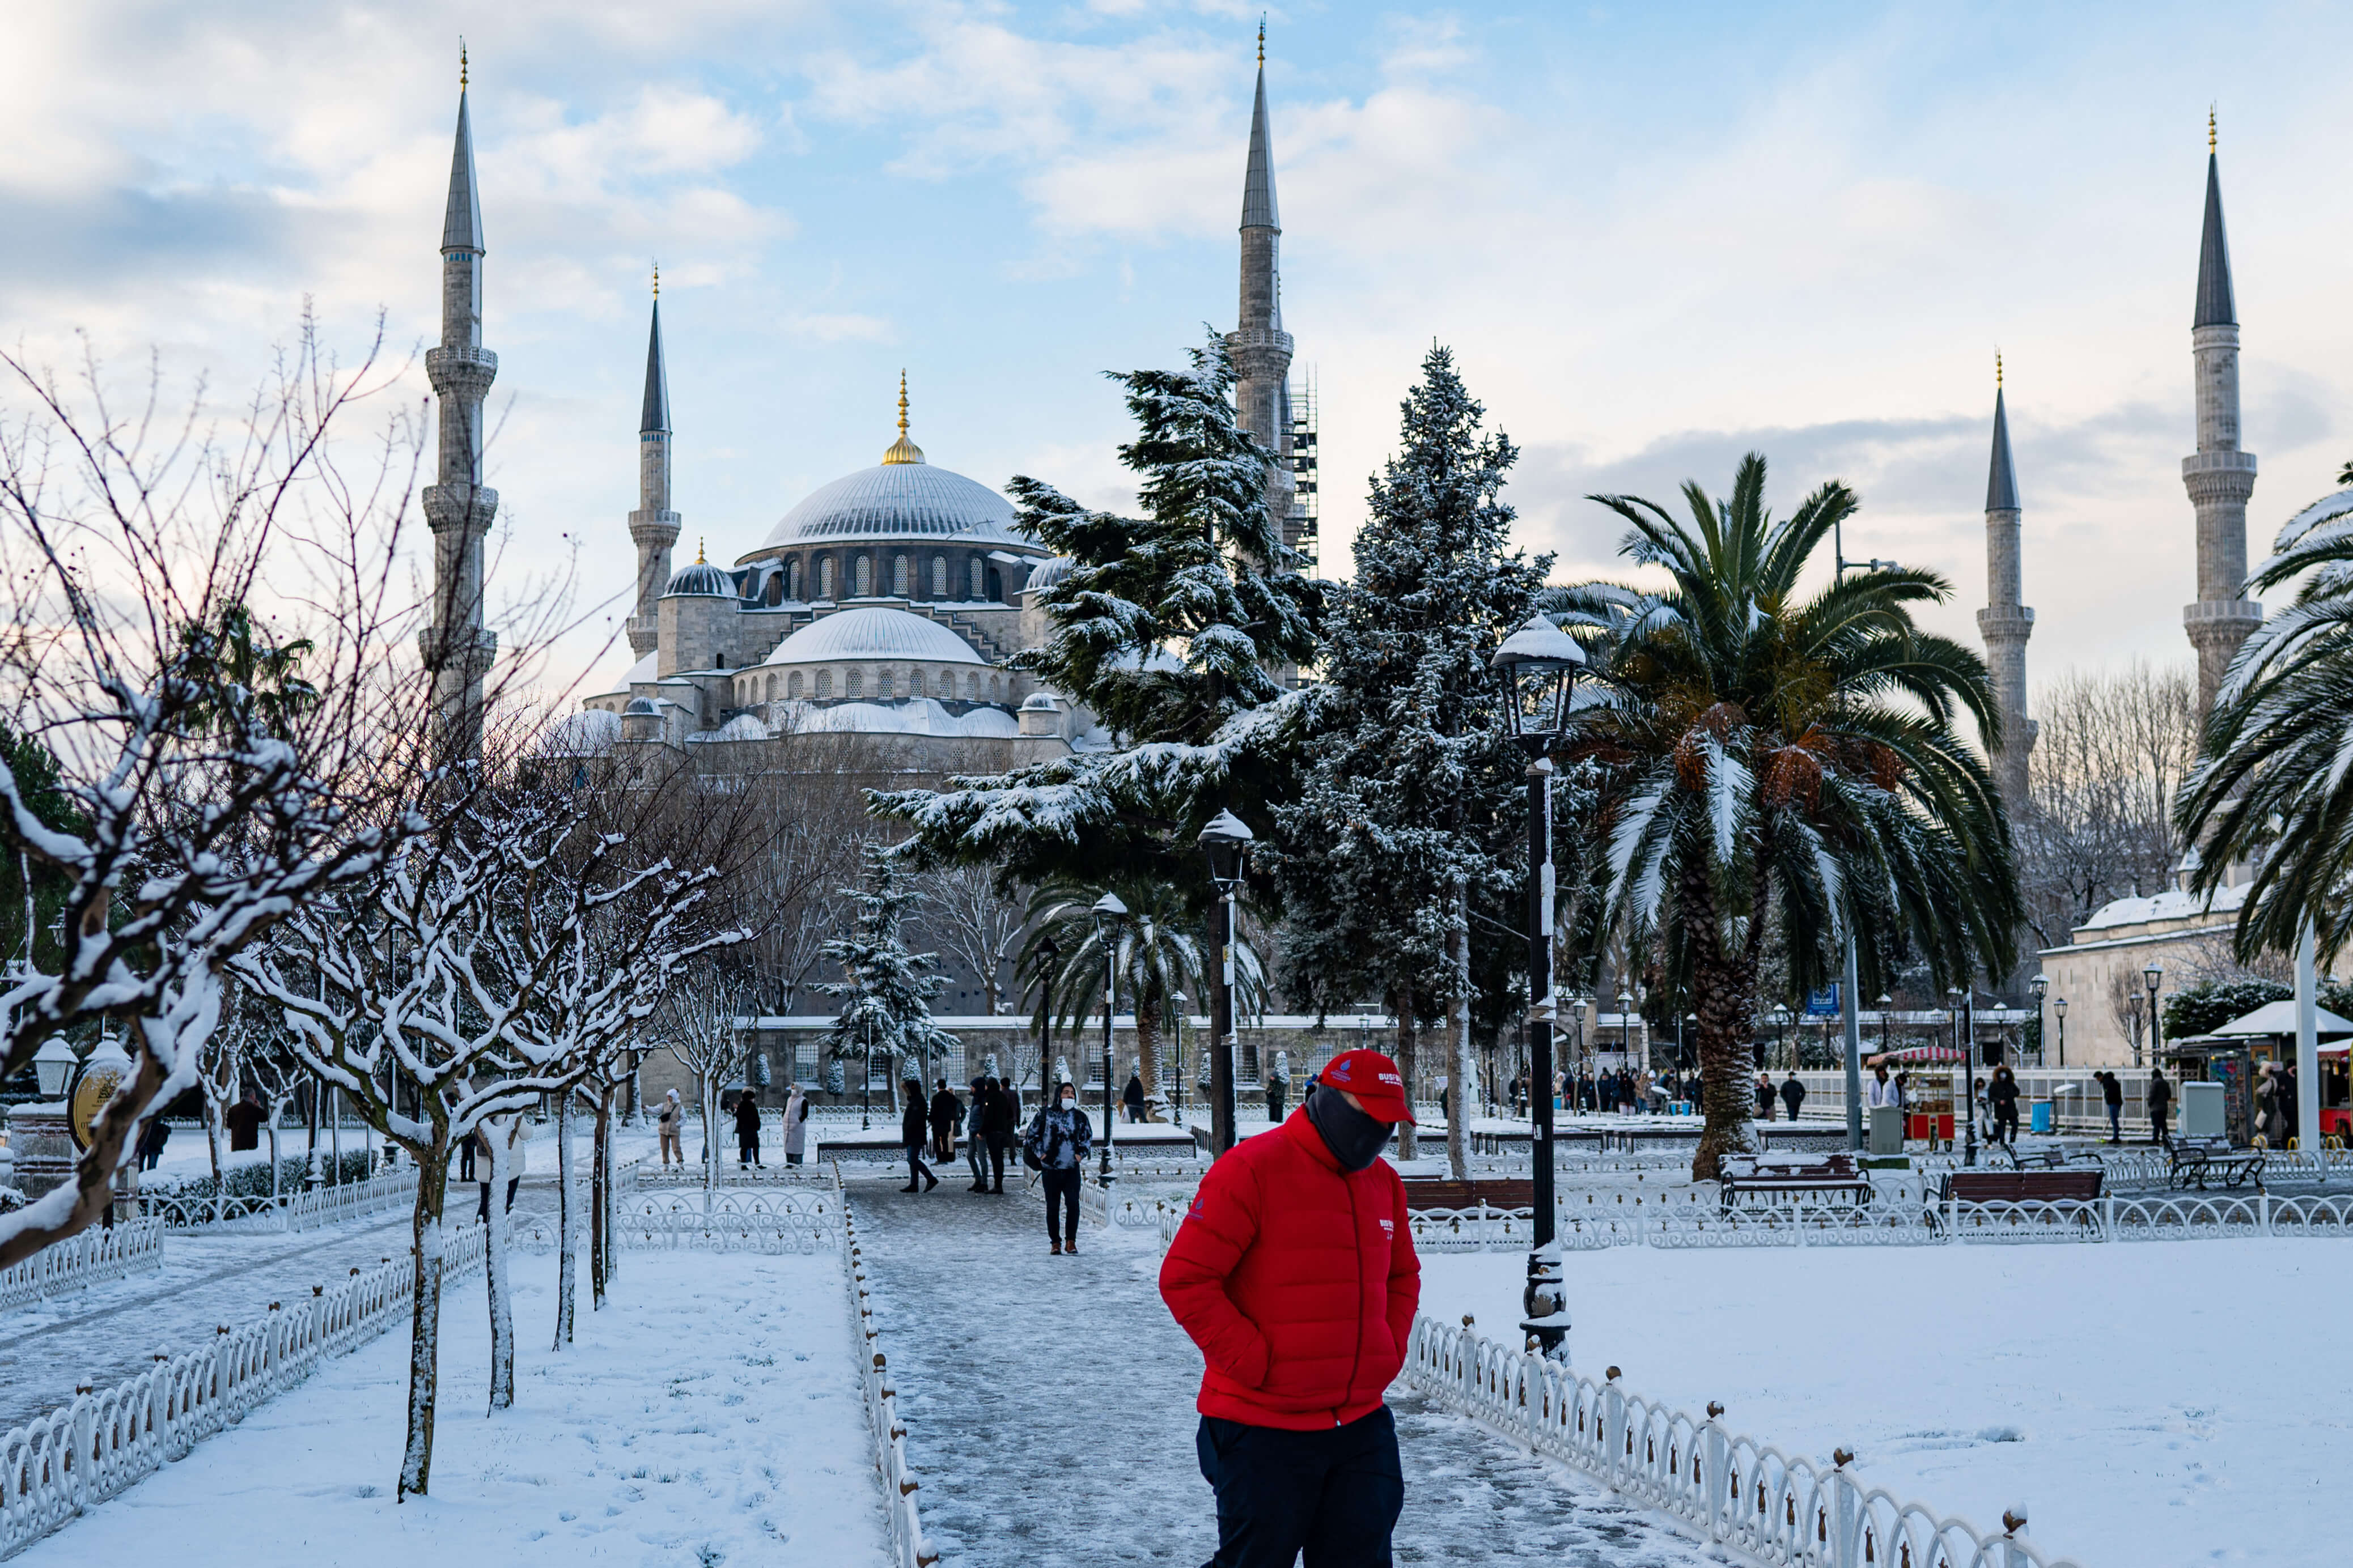 Architectural wonders, Turkish delights, scholarships: Why study in Turkey